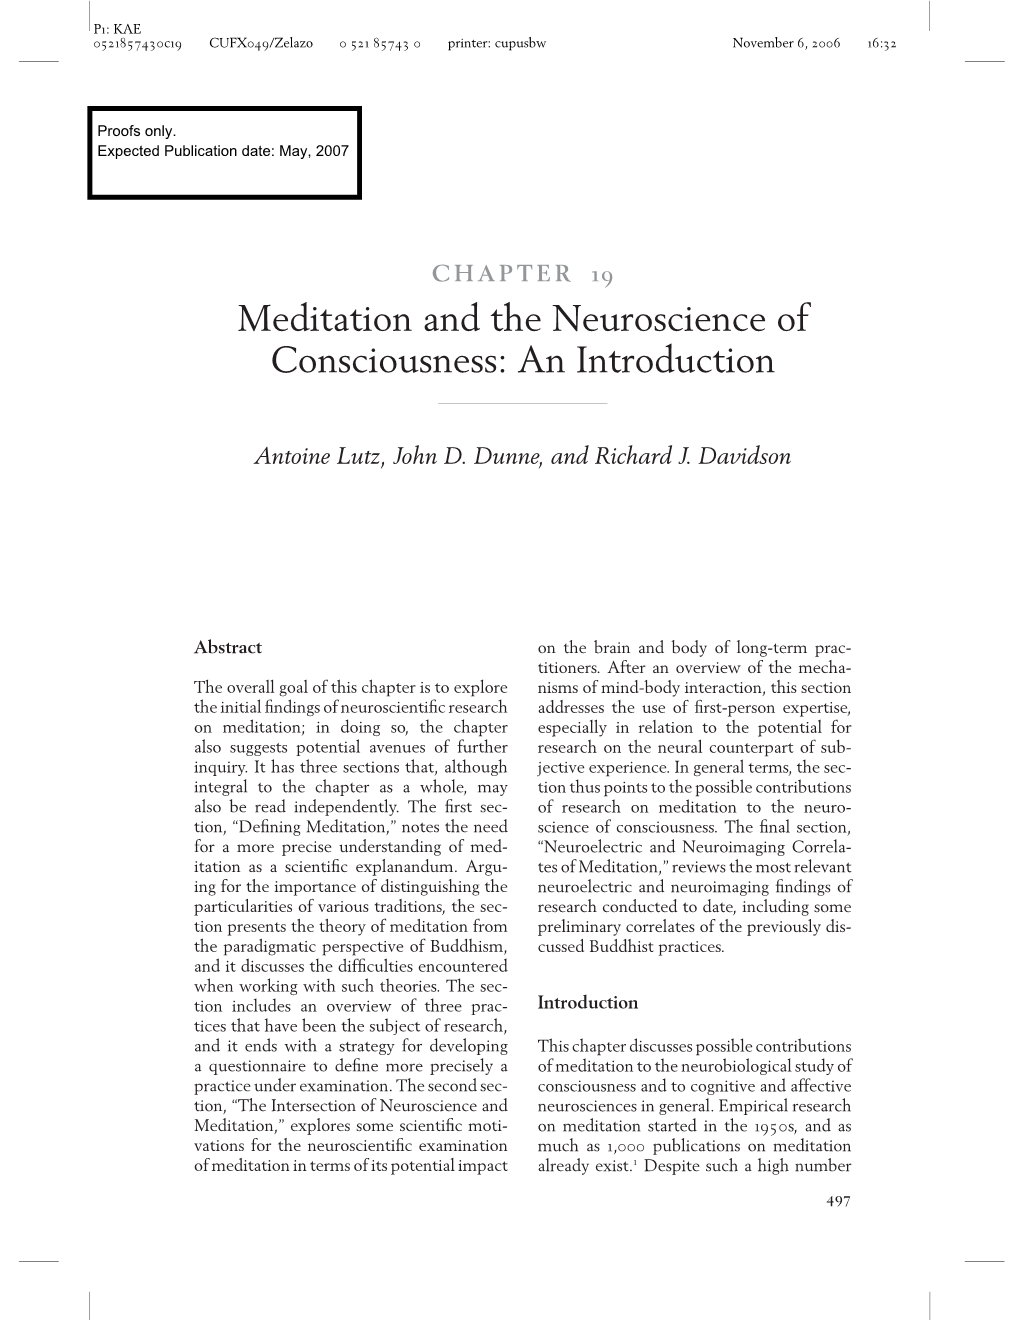 Meditation and the Neuroscience of Consciousness: an Introduction